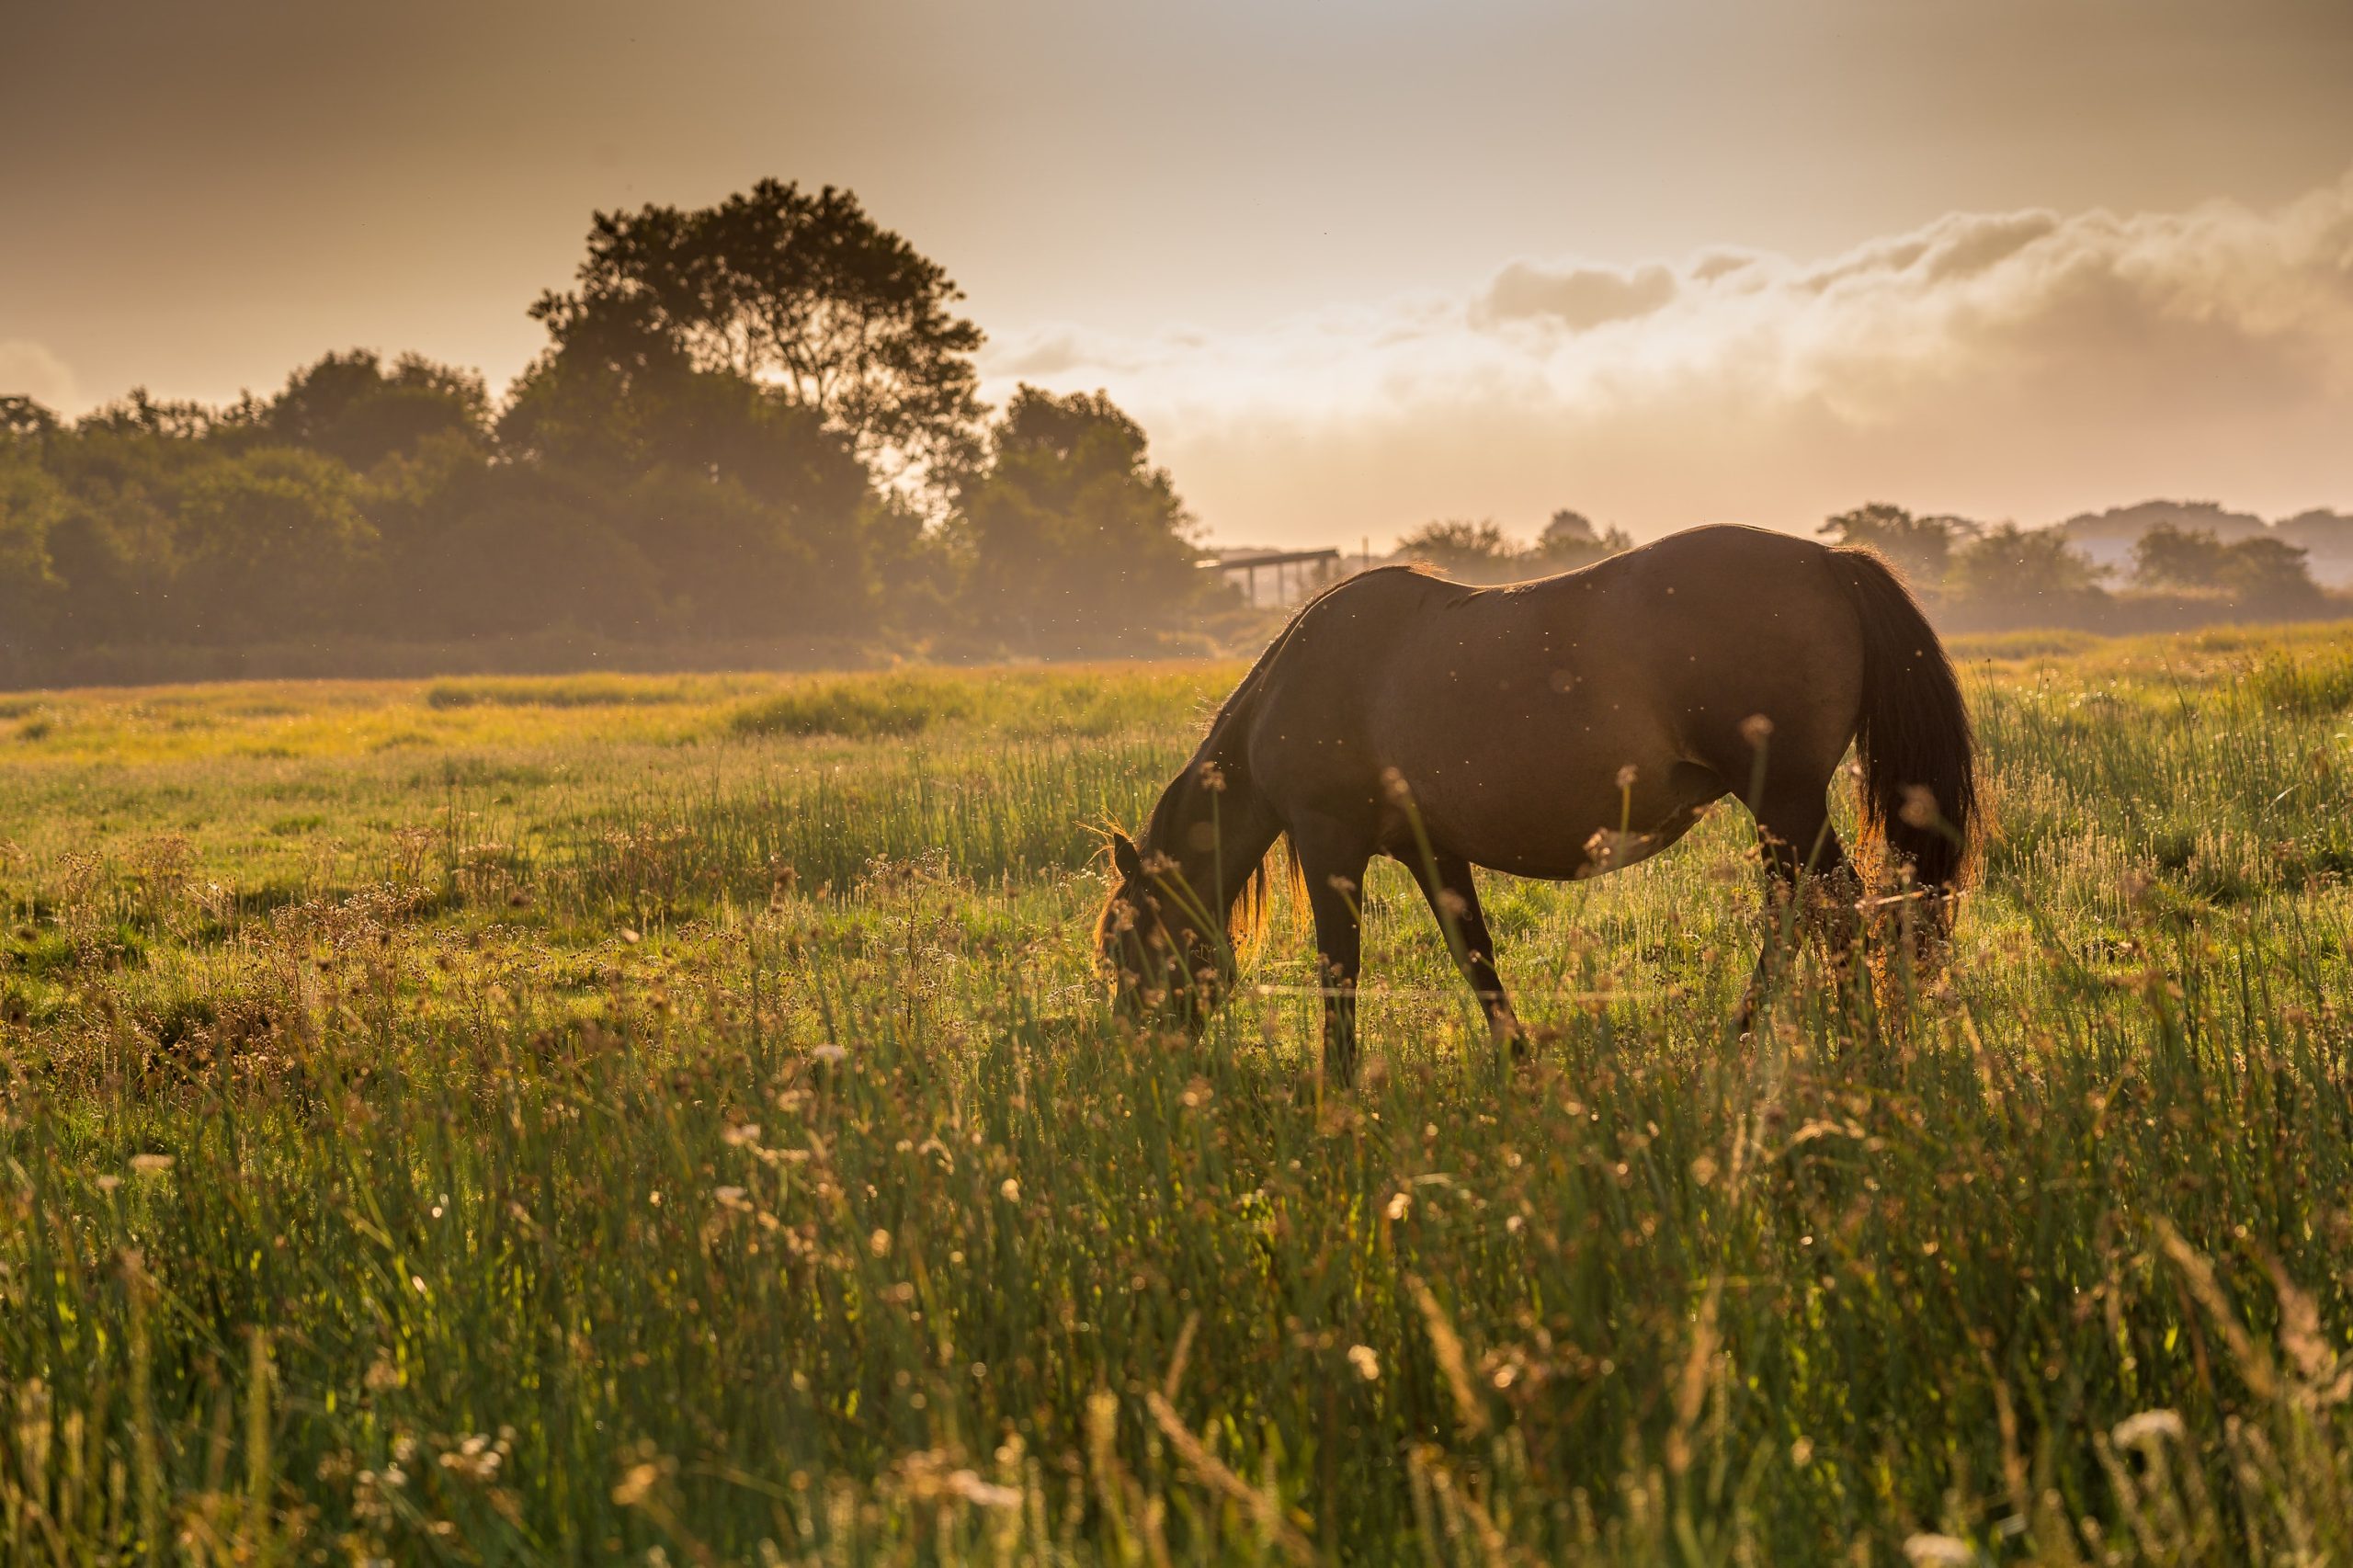 horse grazing in a field during golden hour